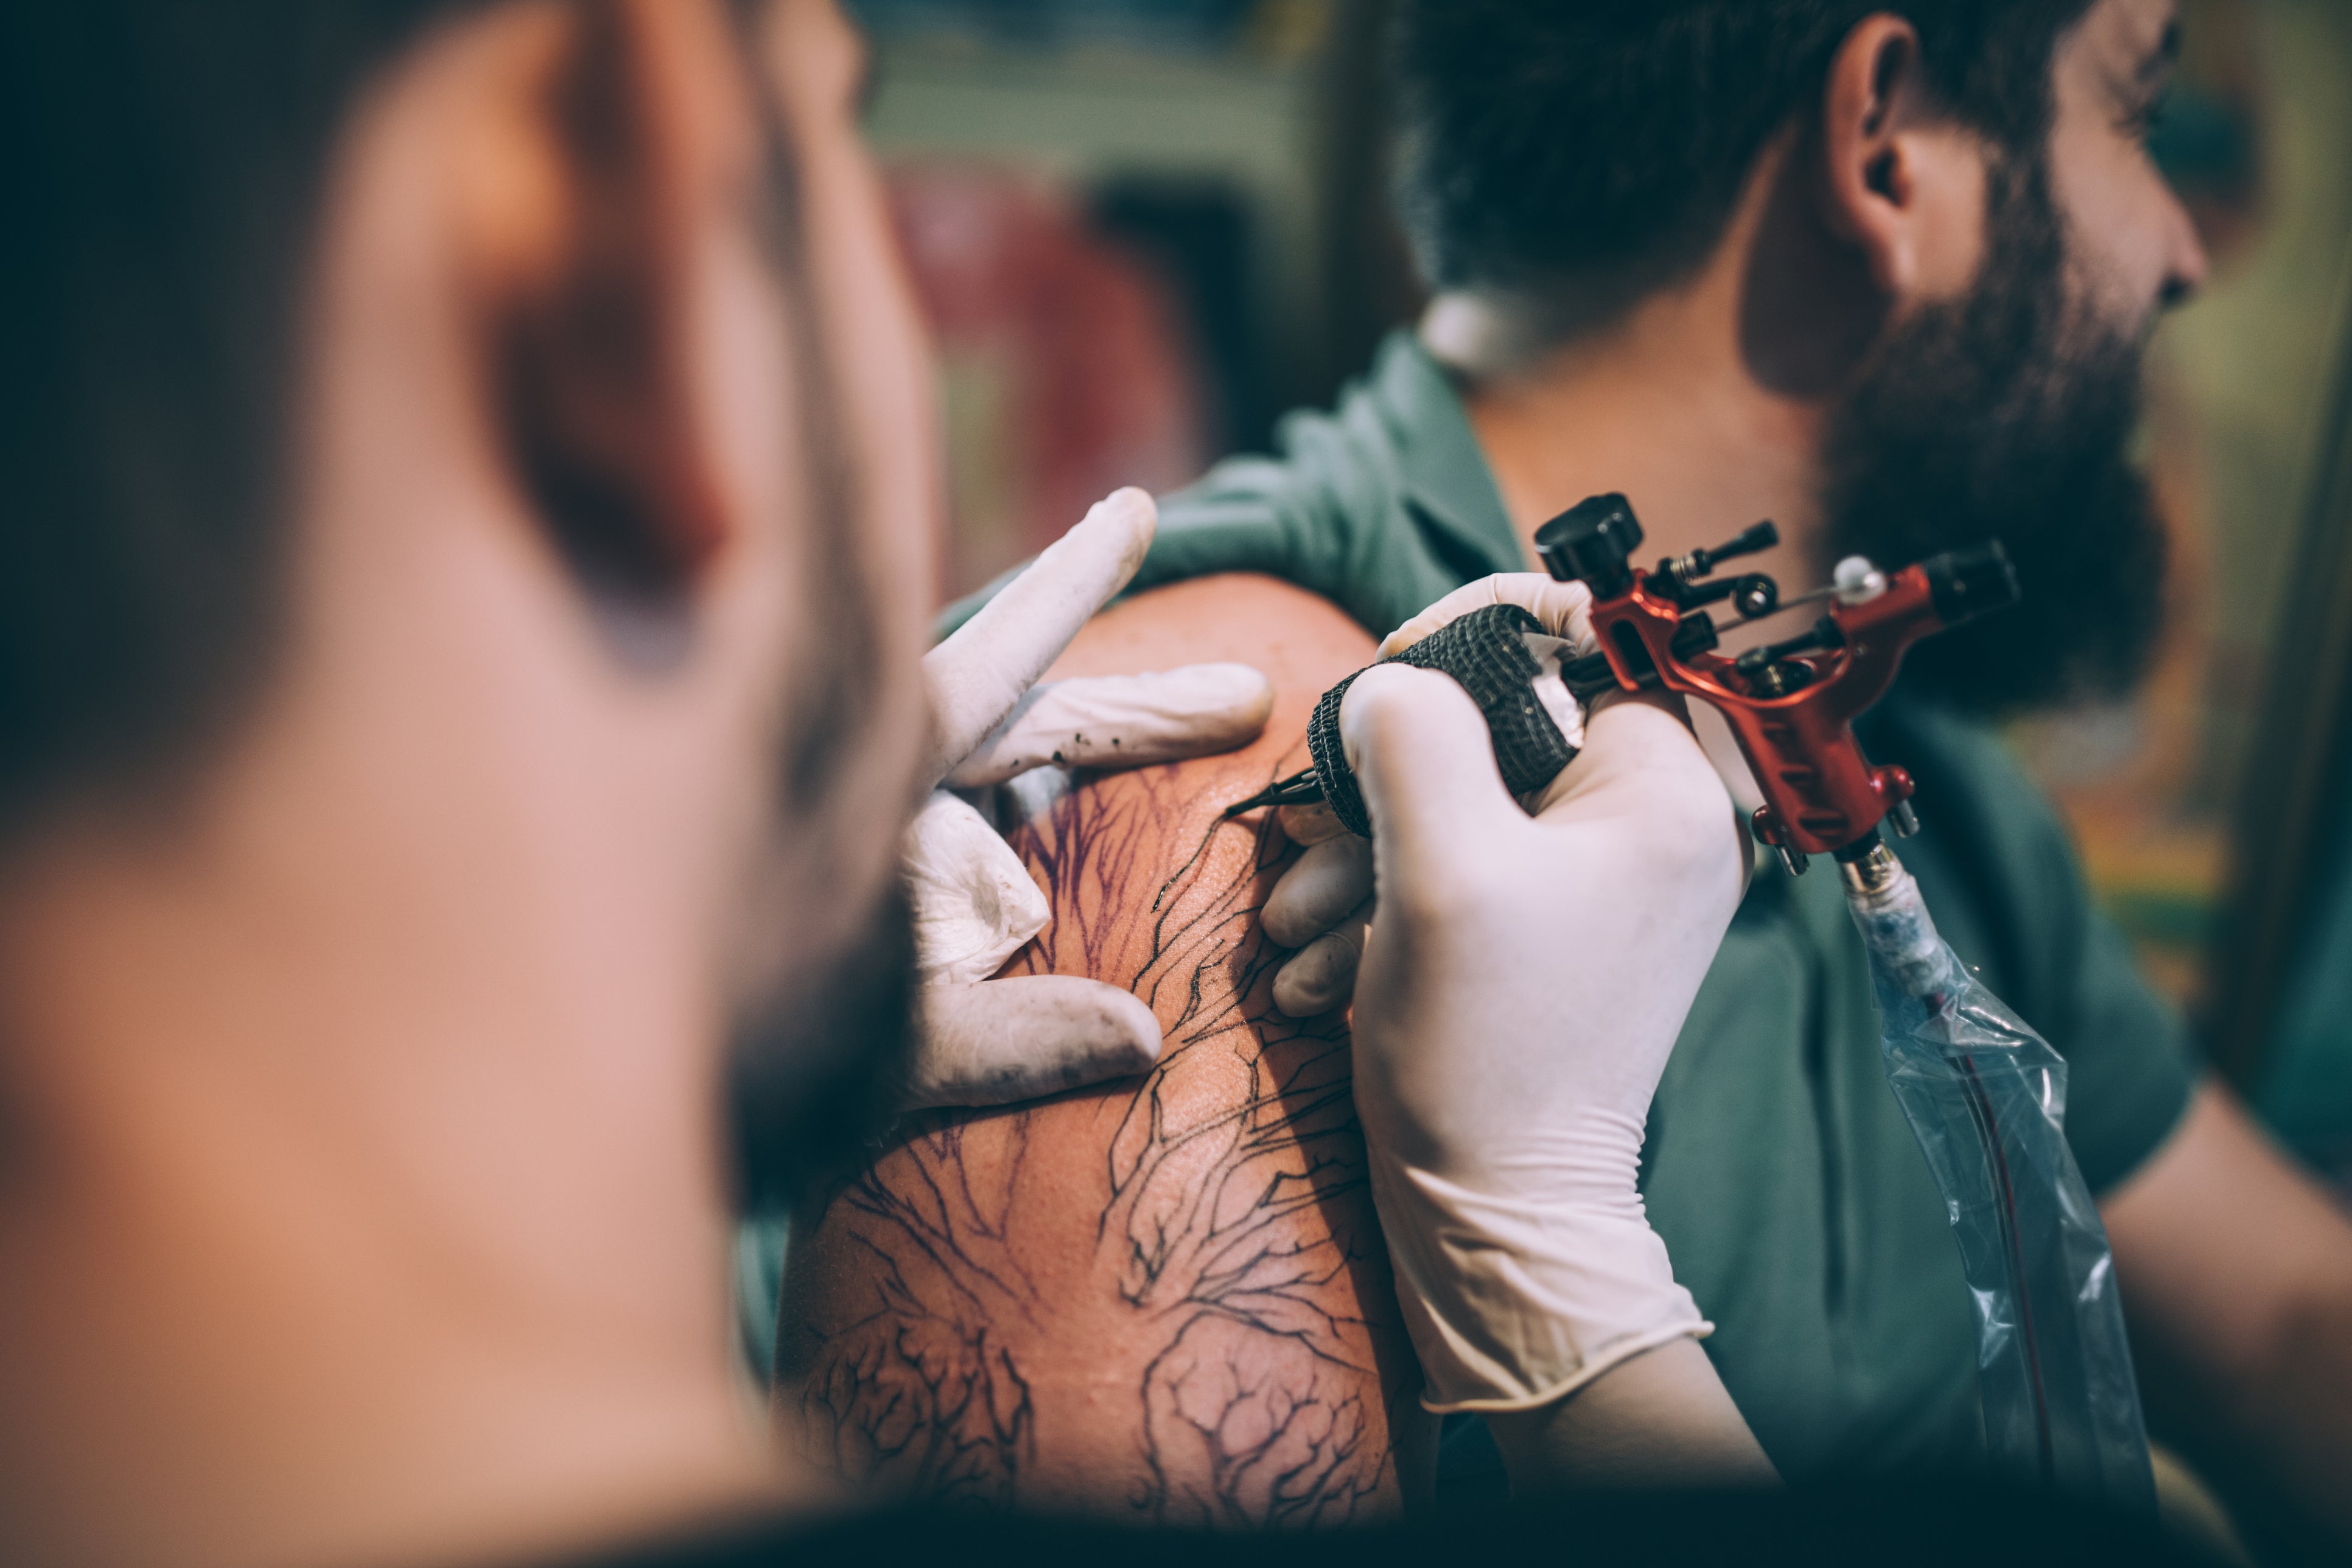 <p>‘The goal isn’t to replace all tattoos, which are often works of beauty created by tattoo artists’, the researchers said</p>